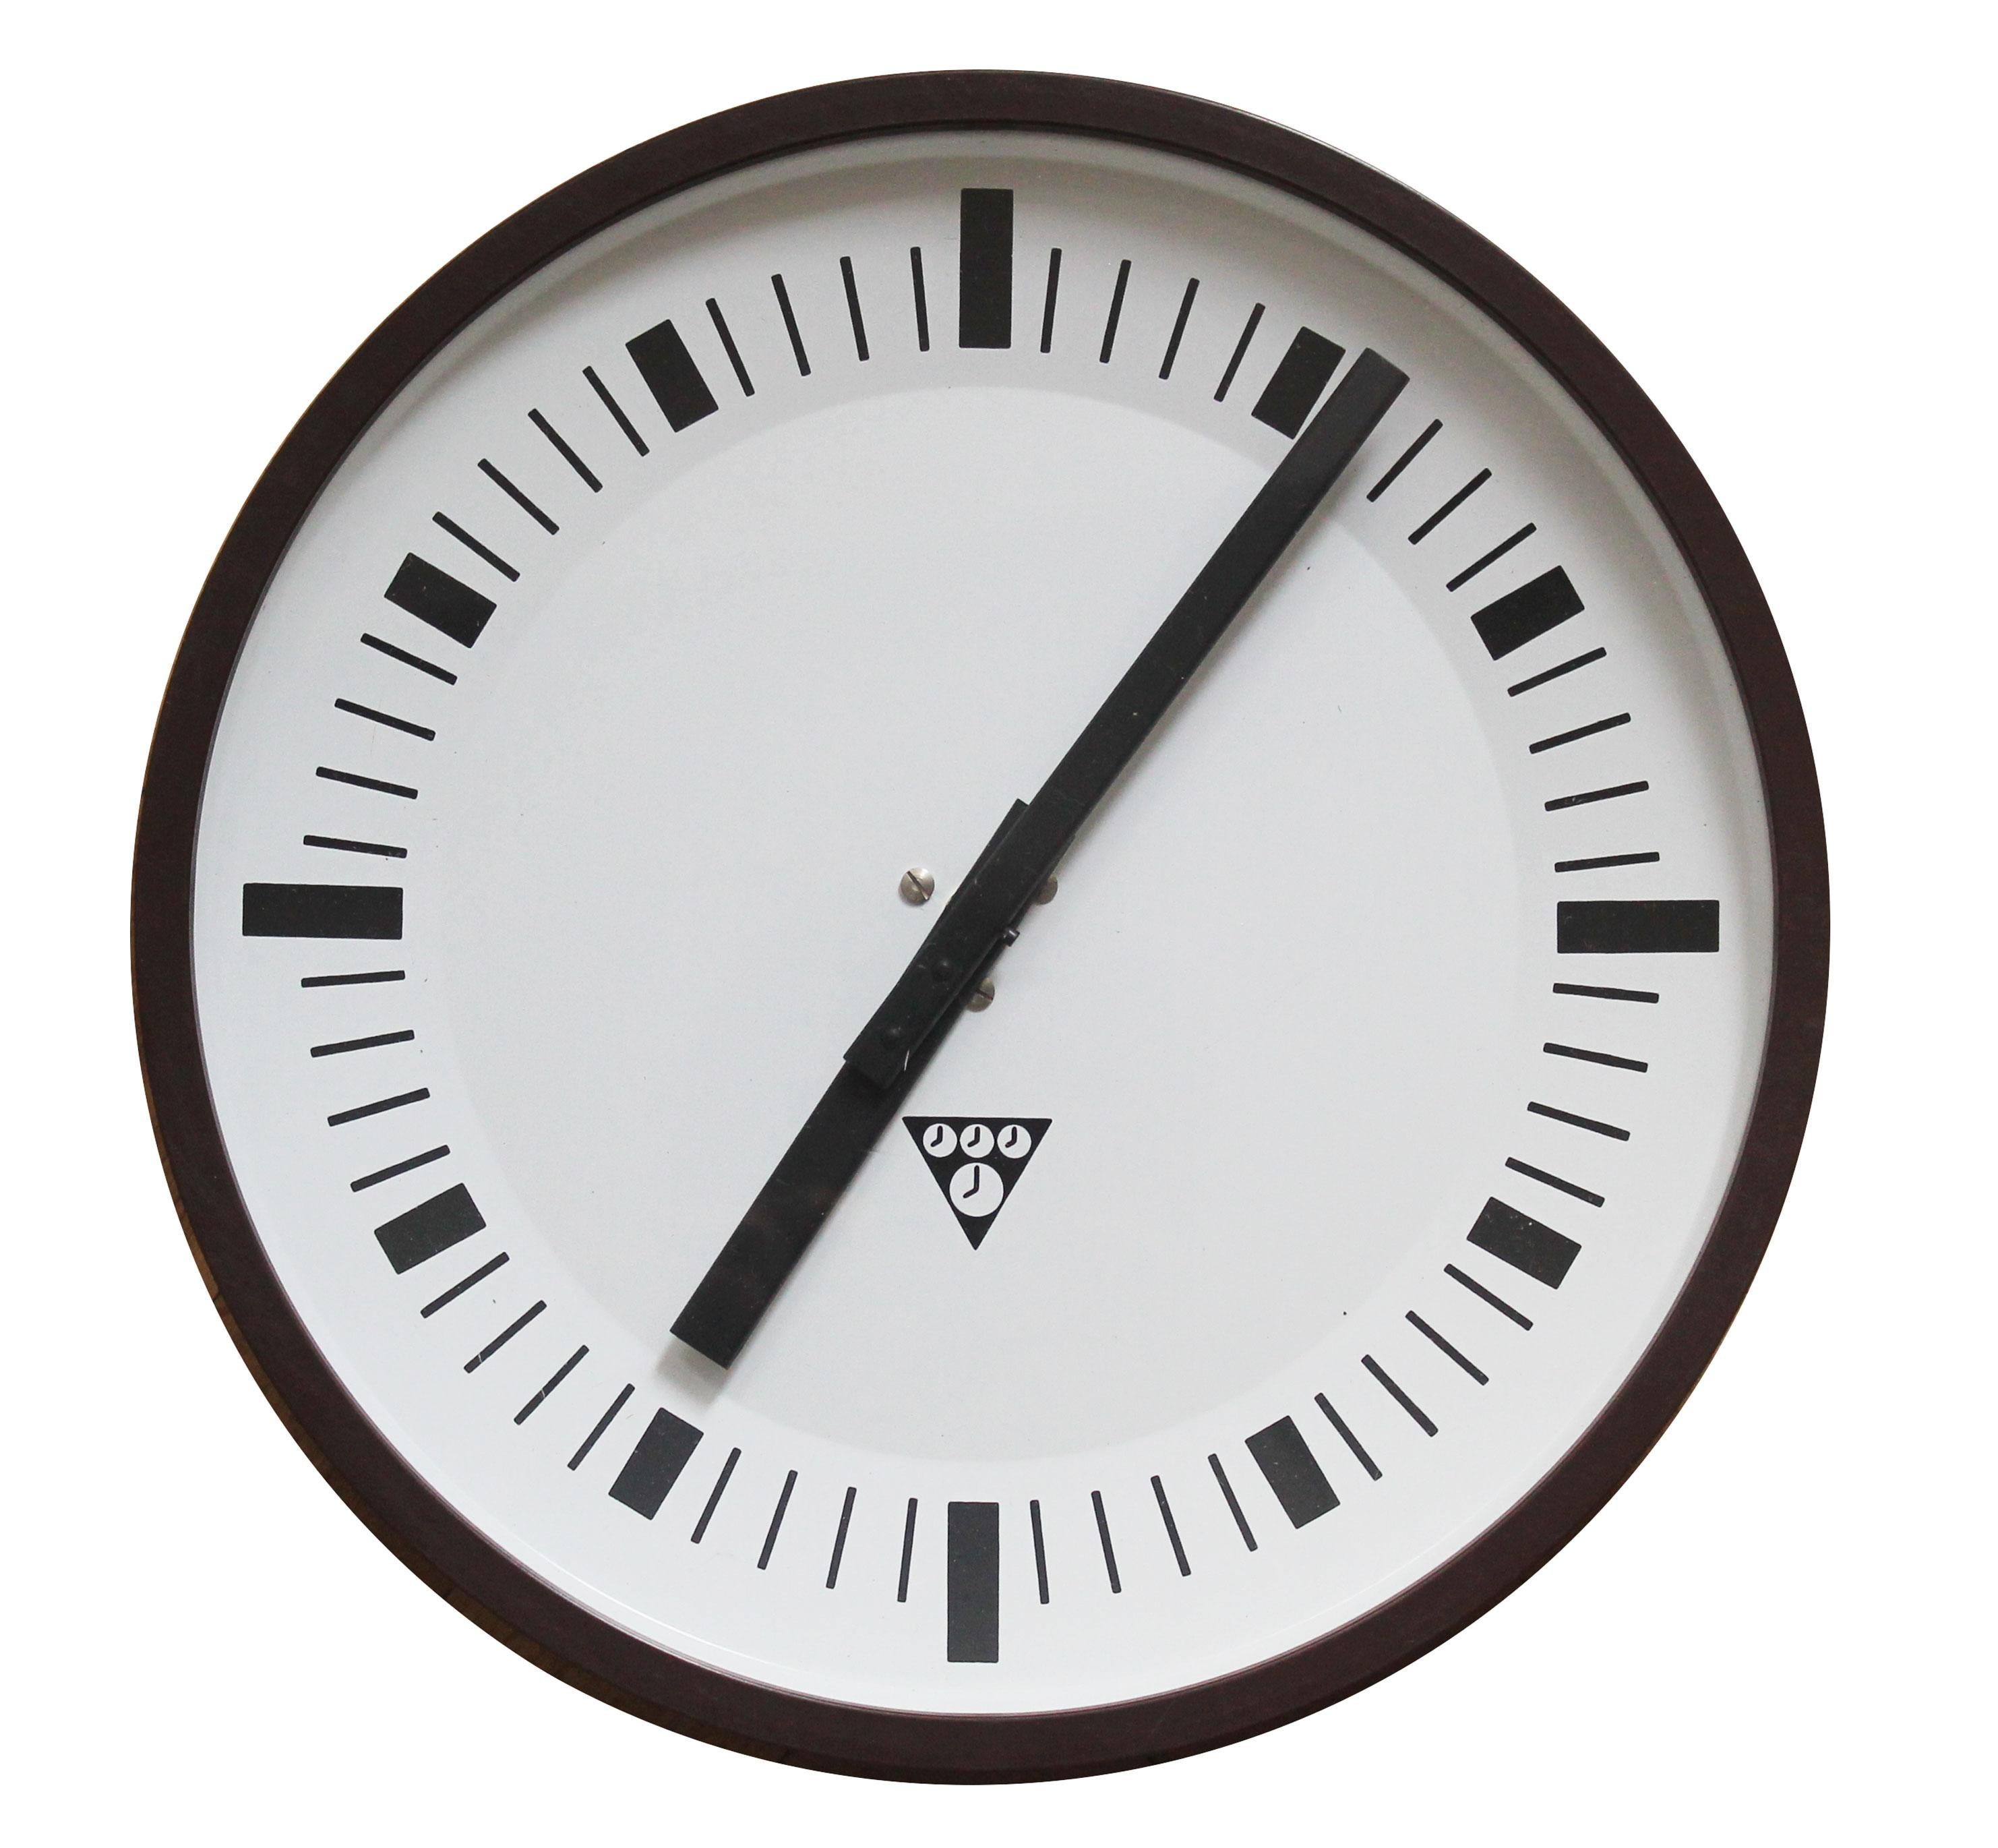 This is an unique Pragotron PK-27 wall clock with distinctive brown outer frame that was produced in small quantities. Its an original industrial wall clock from the 1960s Czechoslovakia.

Pragotron Company (with their trademark triangular logo of